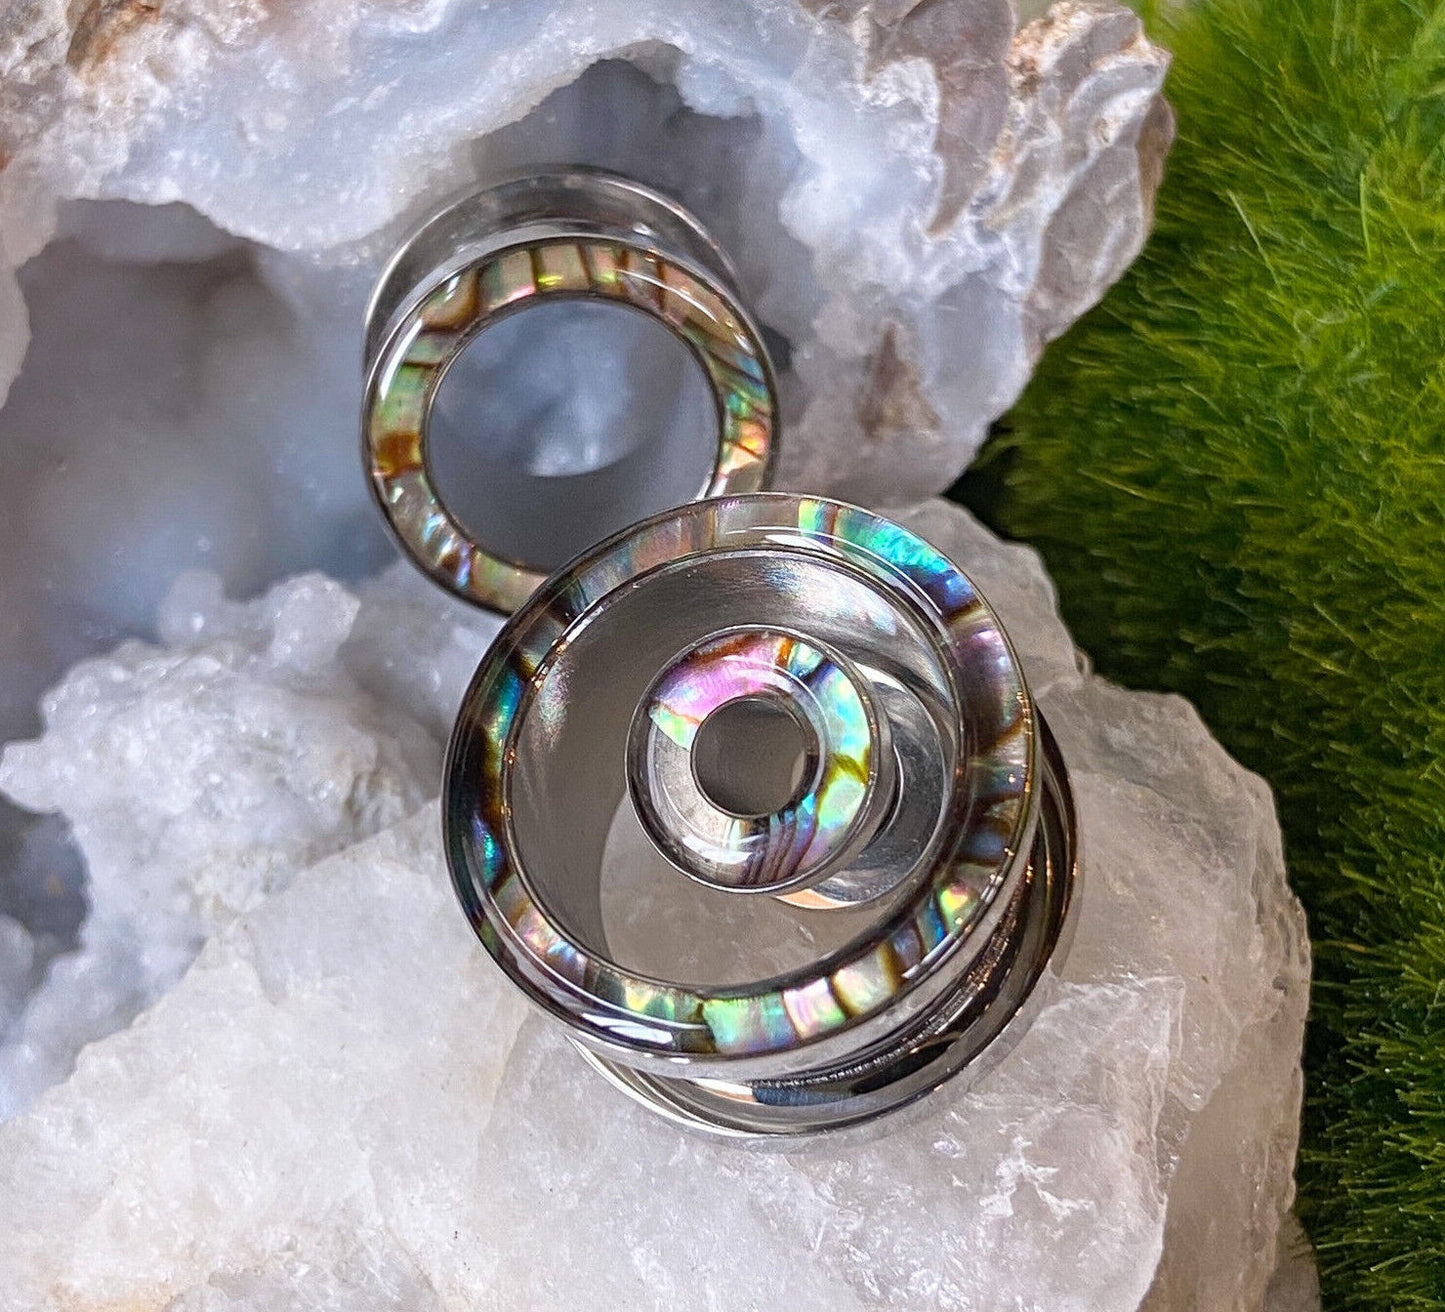 PAIR of Beautiful Abalone Inlay Steel Screw Fit Tunnels - Gauges 4g (5mm) thru 5/8" (16mm) available!